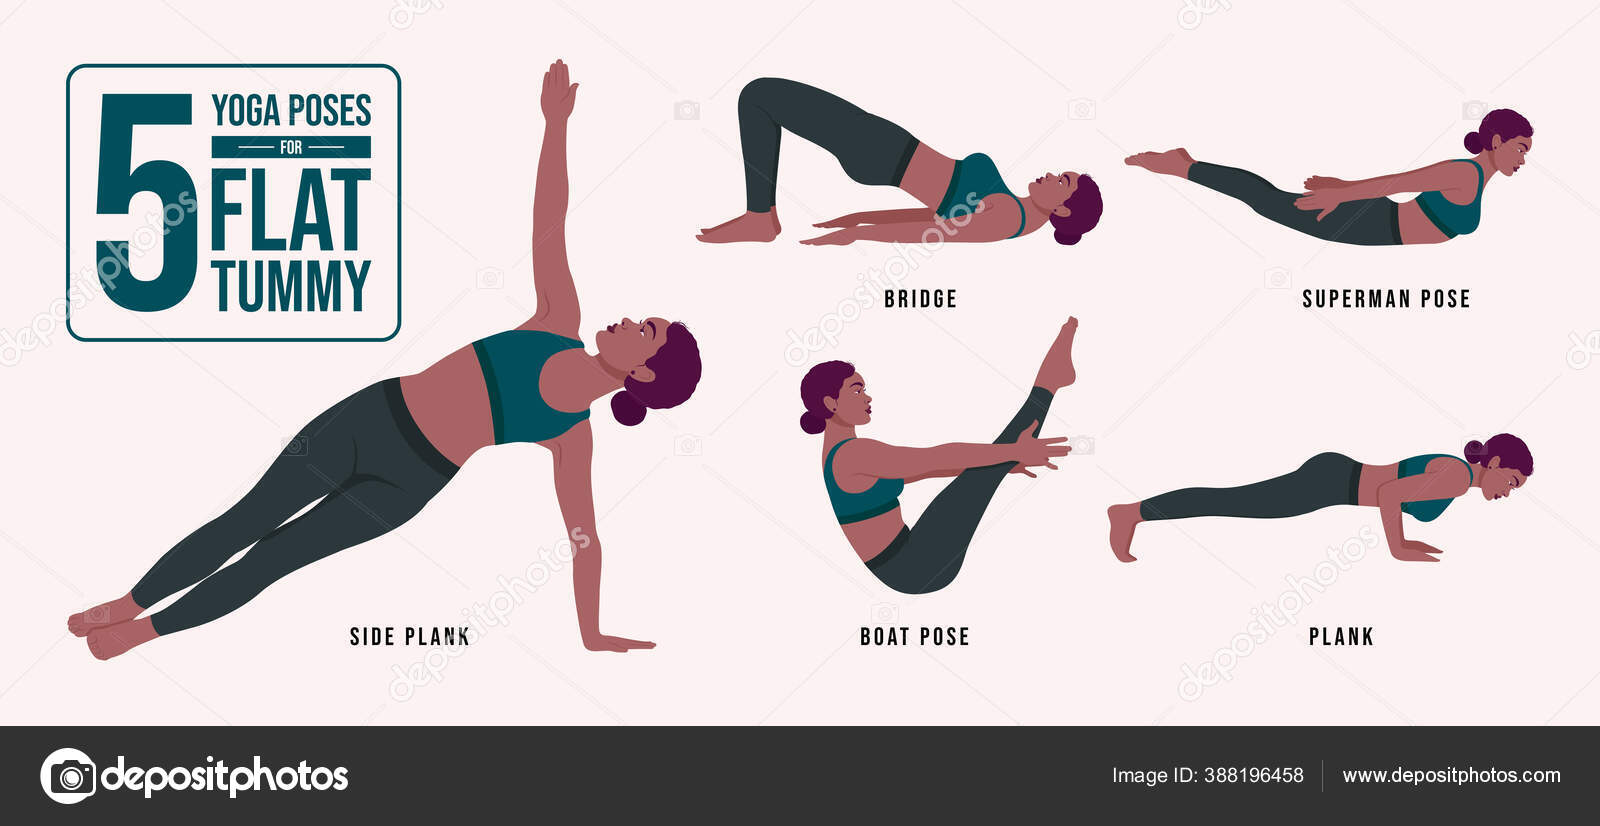 Yoga Poses Flat Stomach Young Woman Stock Vector (Royalty Free) 1980800276  | Shutterstock